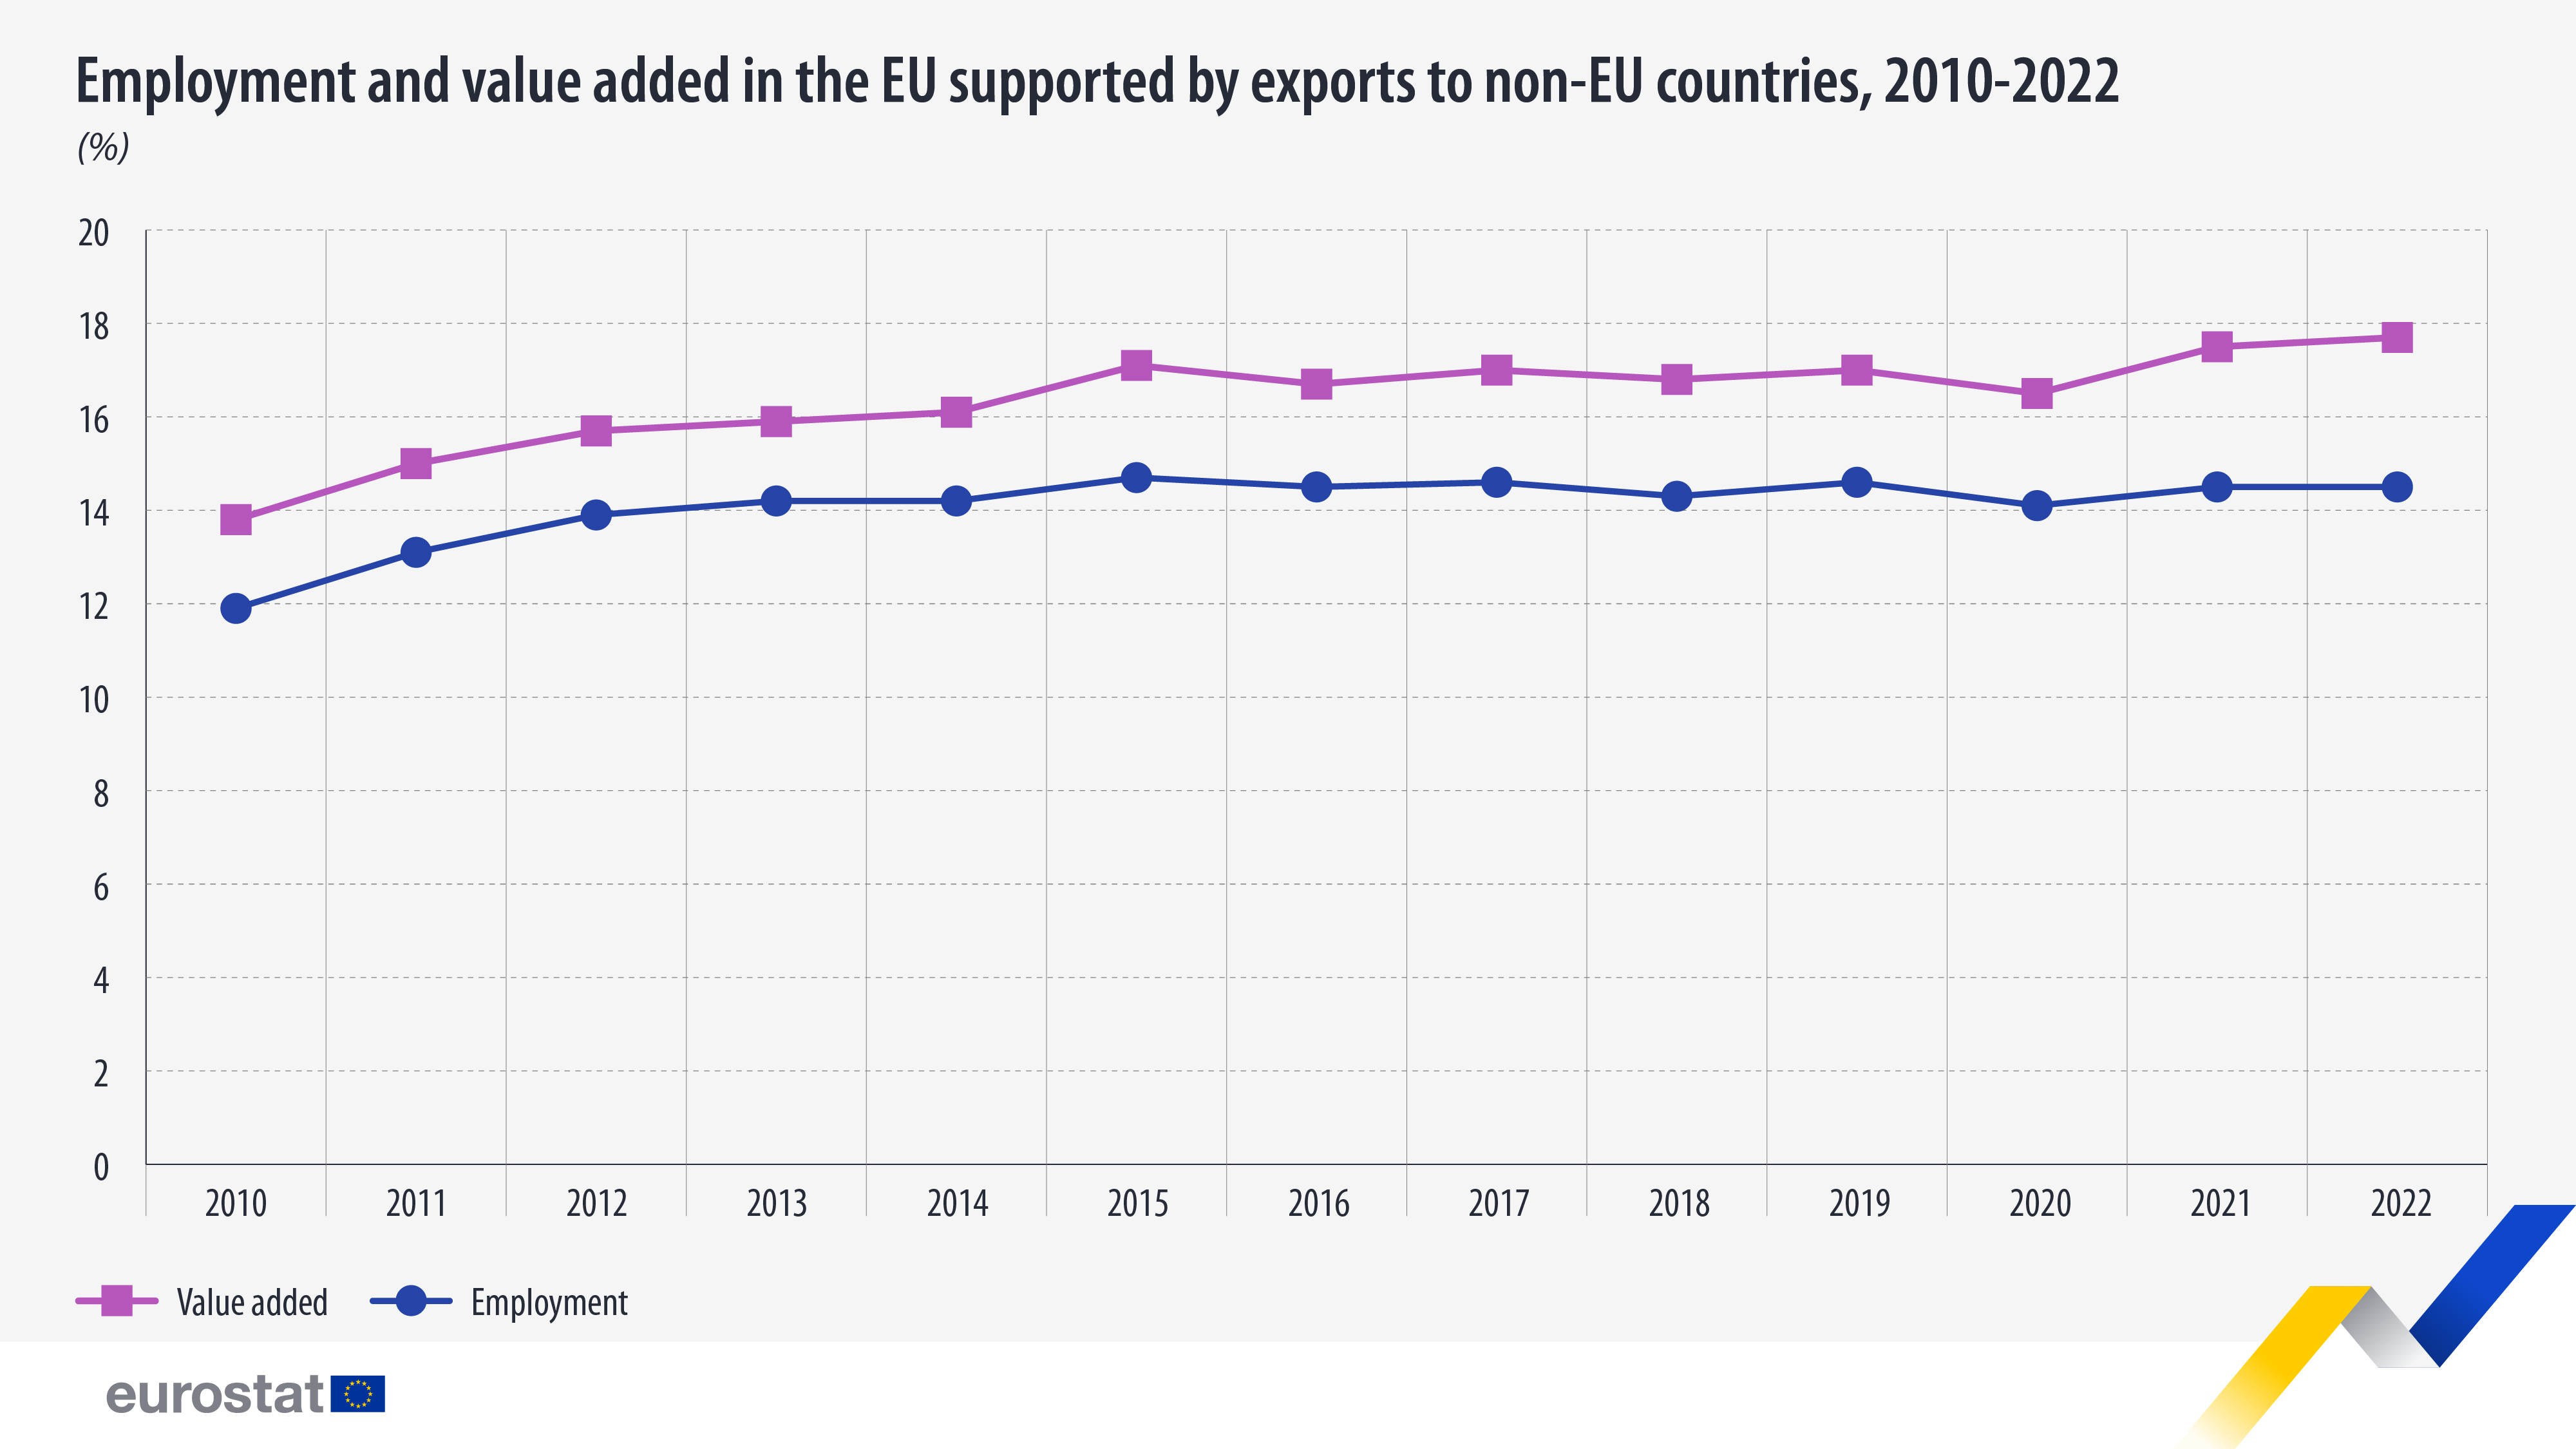 Employment and value added in the EU supported by exports to non-EU countries, 2010-2022, %. Chart. See link to the Eurostat calculations file below.